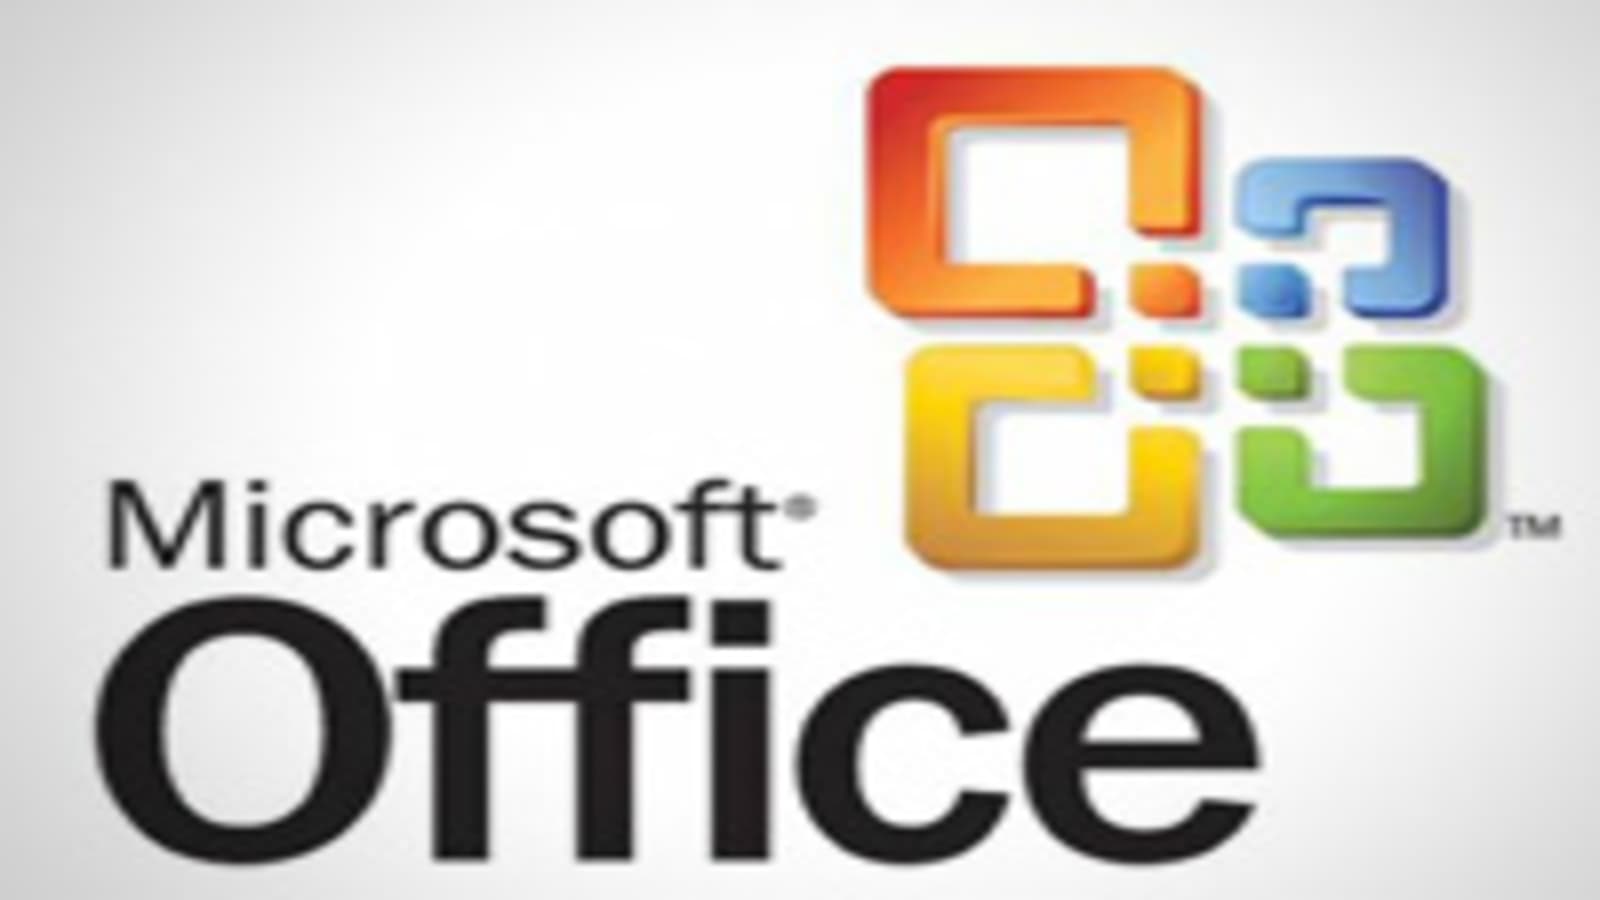 Microsoft Office 2010, 2013 or 2016